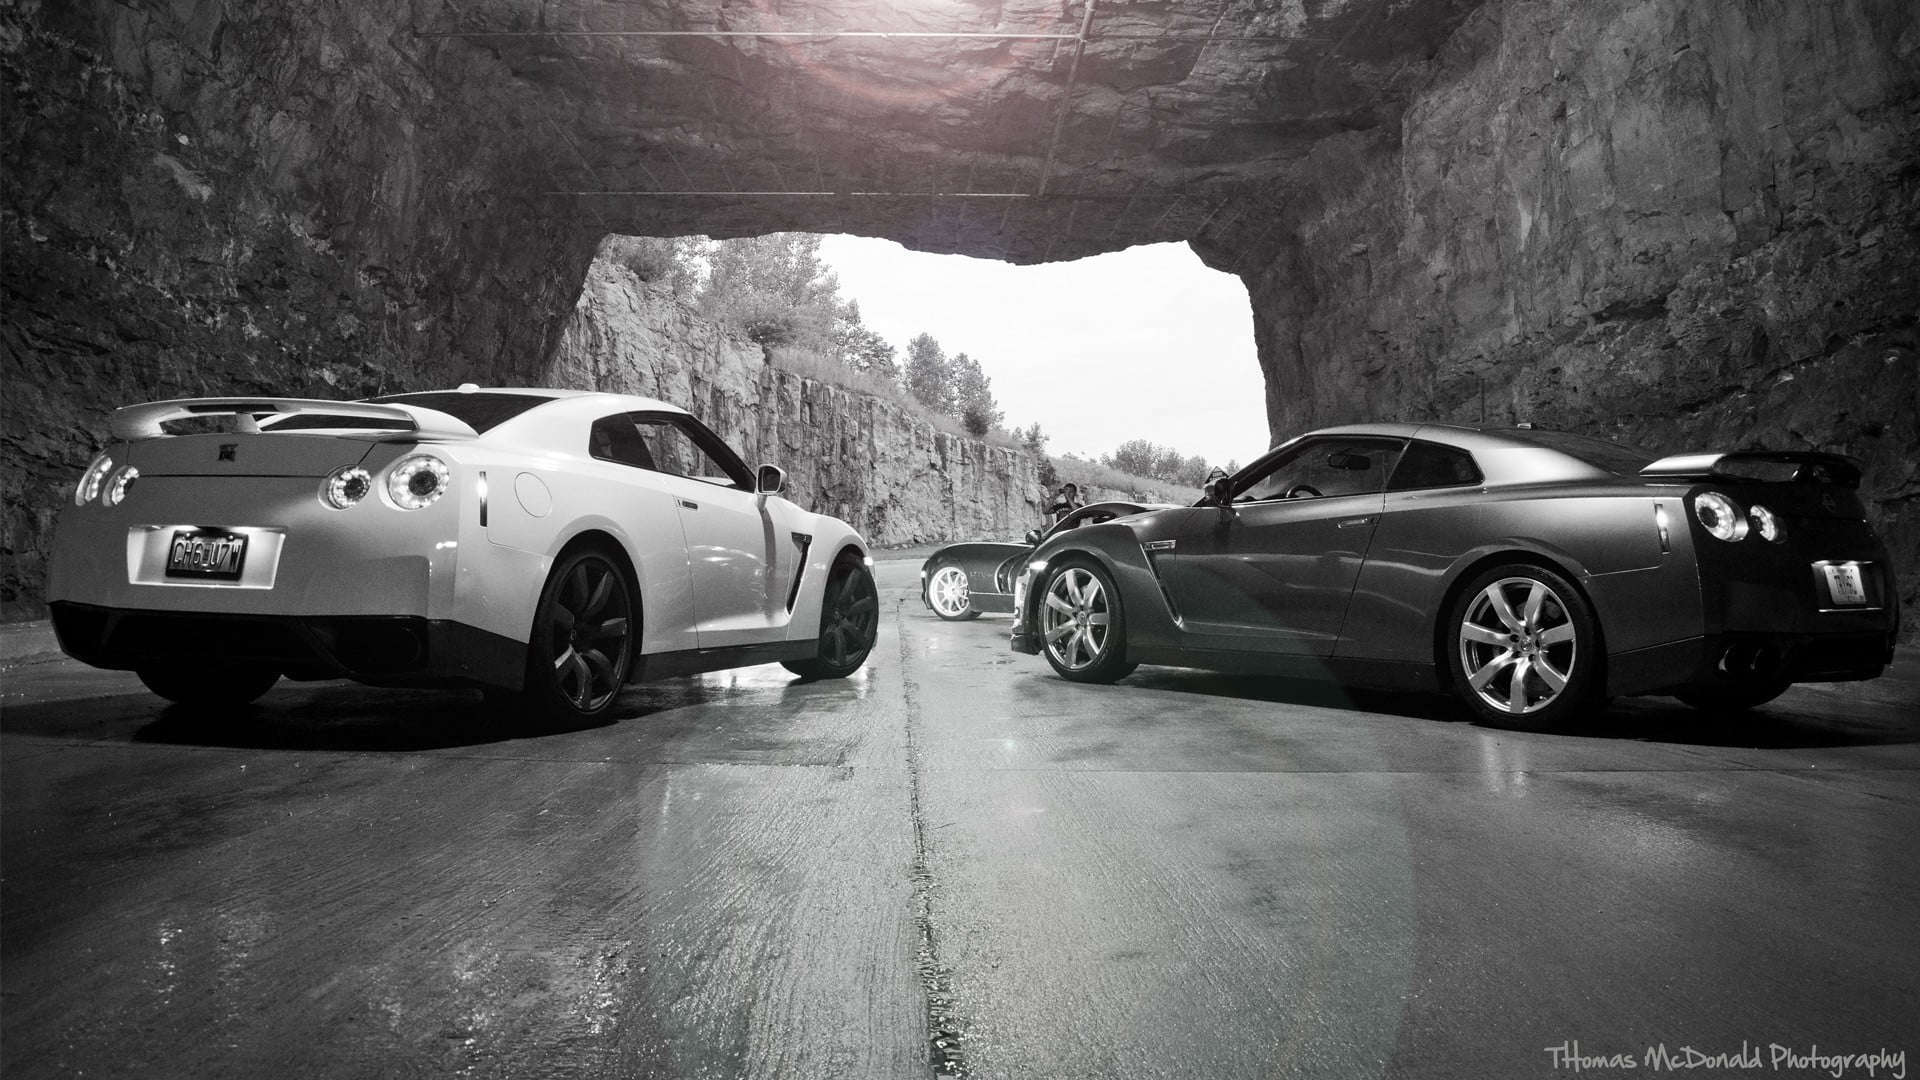 two grayscale photo of Nissan GT-R coupes, Nissan GT-R, Dodge Viper, car